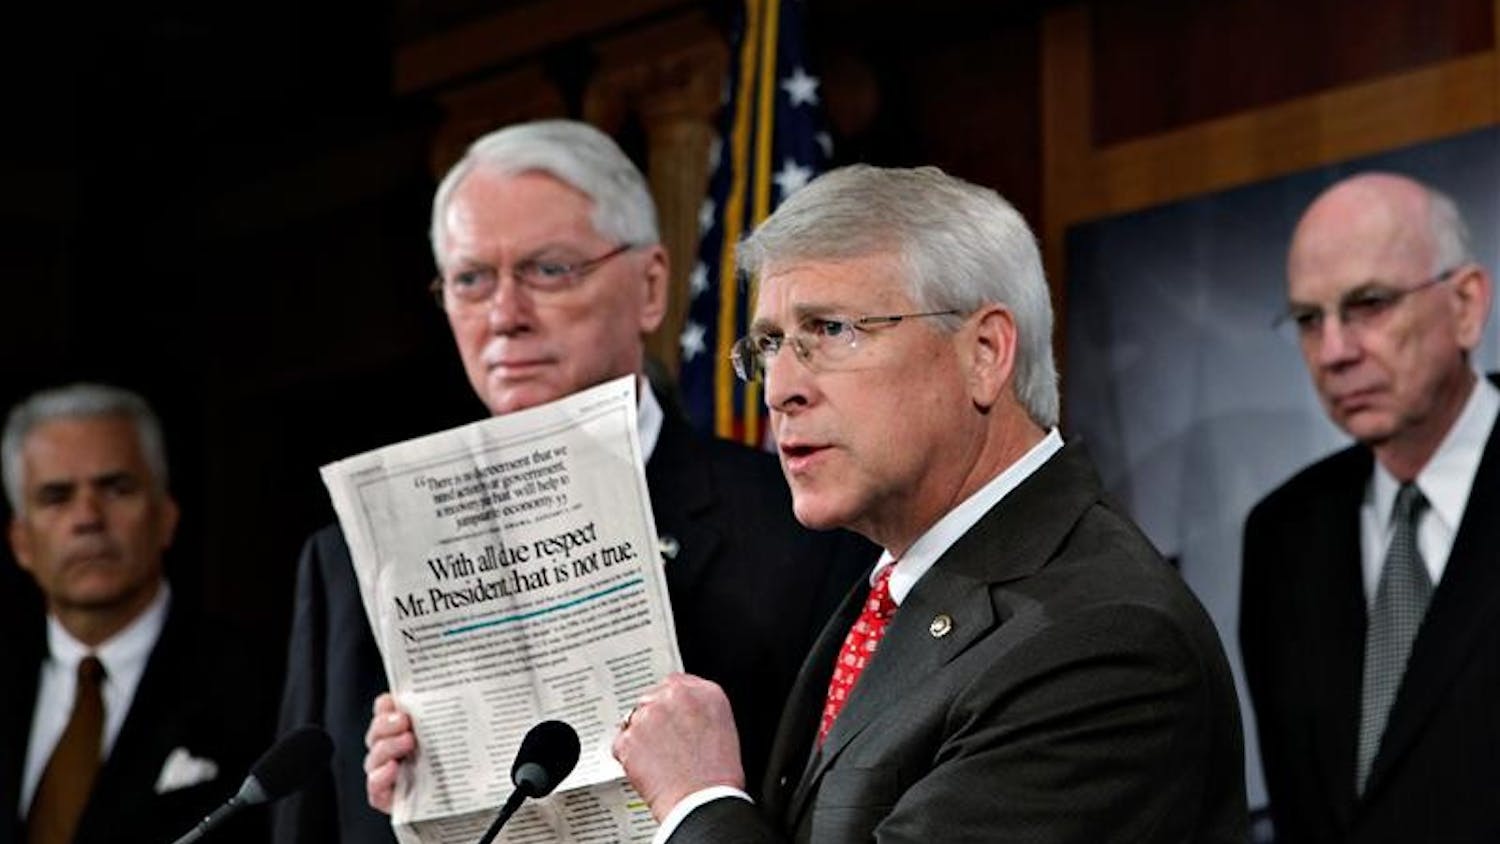 Sen. Roger Wicker of Mississippi joins other Senate Republicans in opposition to President Barack Obama's financial stimulus package as he displays a newspaper advocacy ad during a news conference at the Capitol Thursday in Washington.